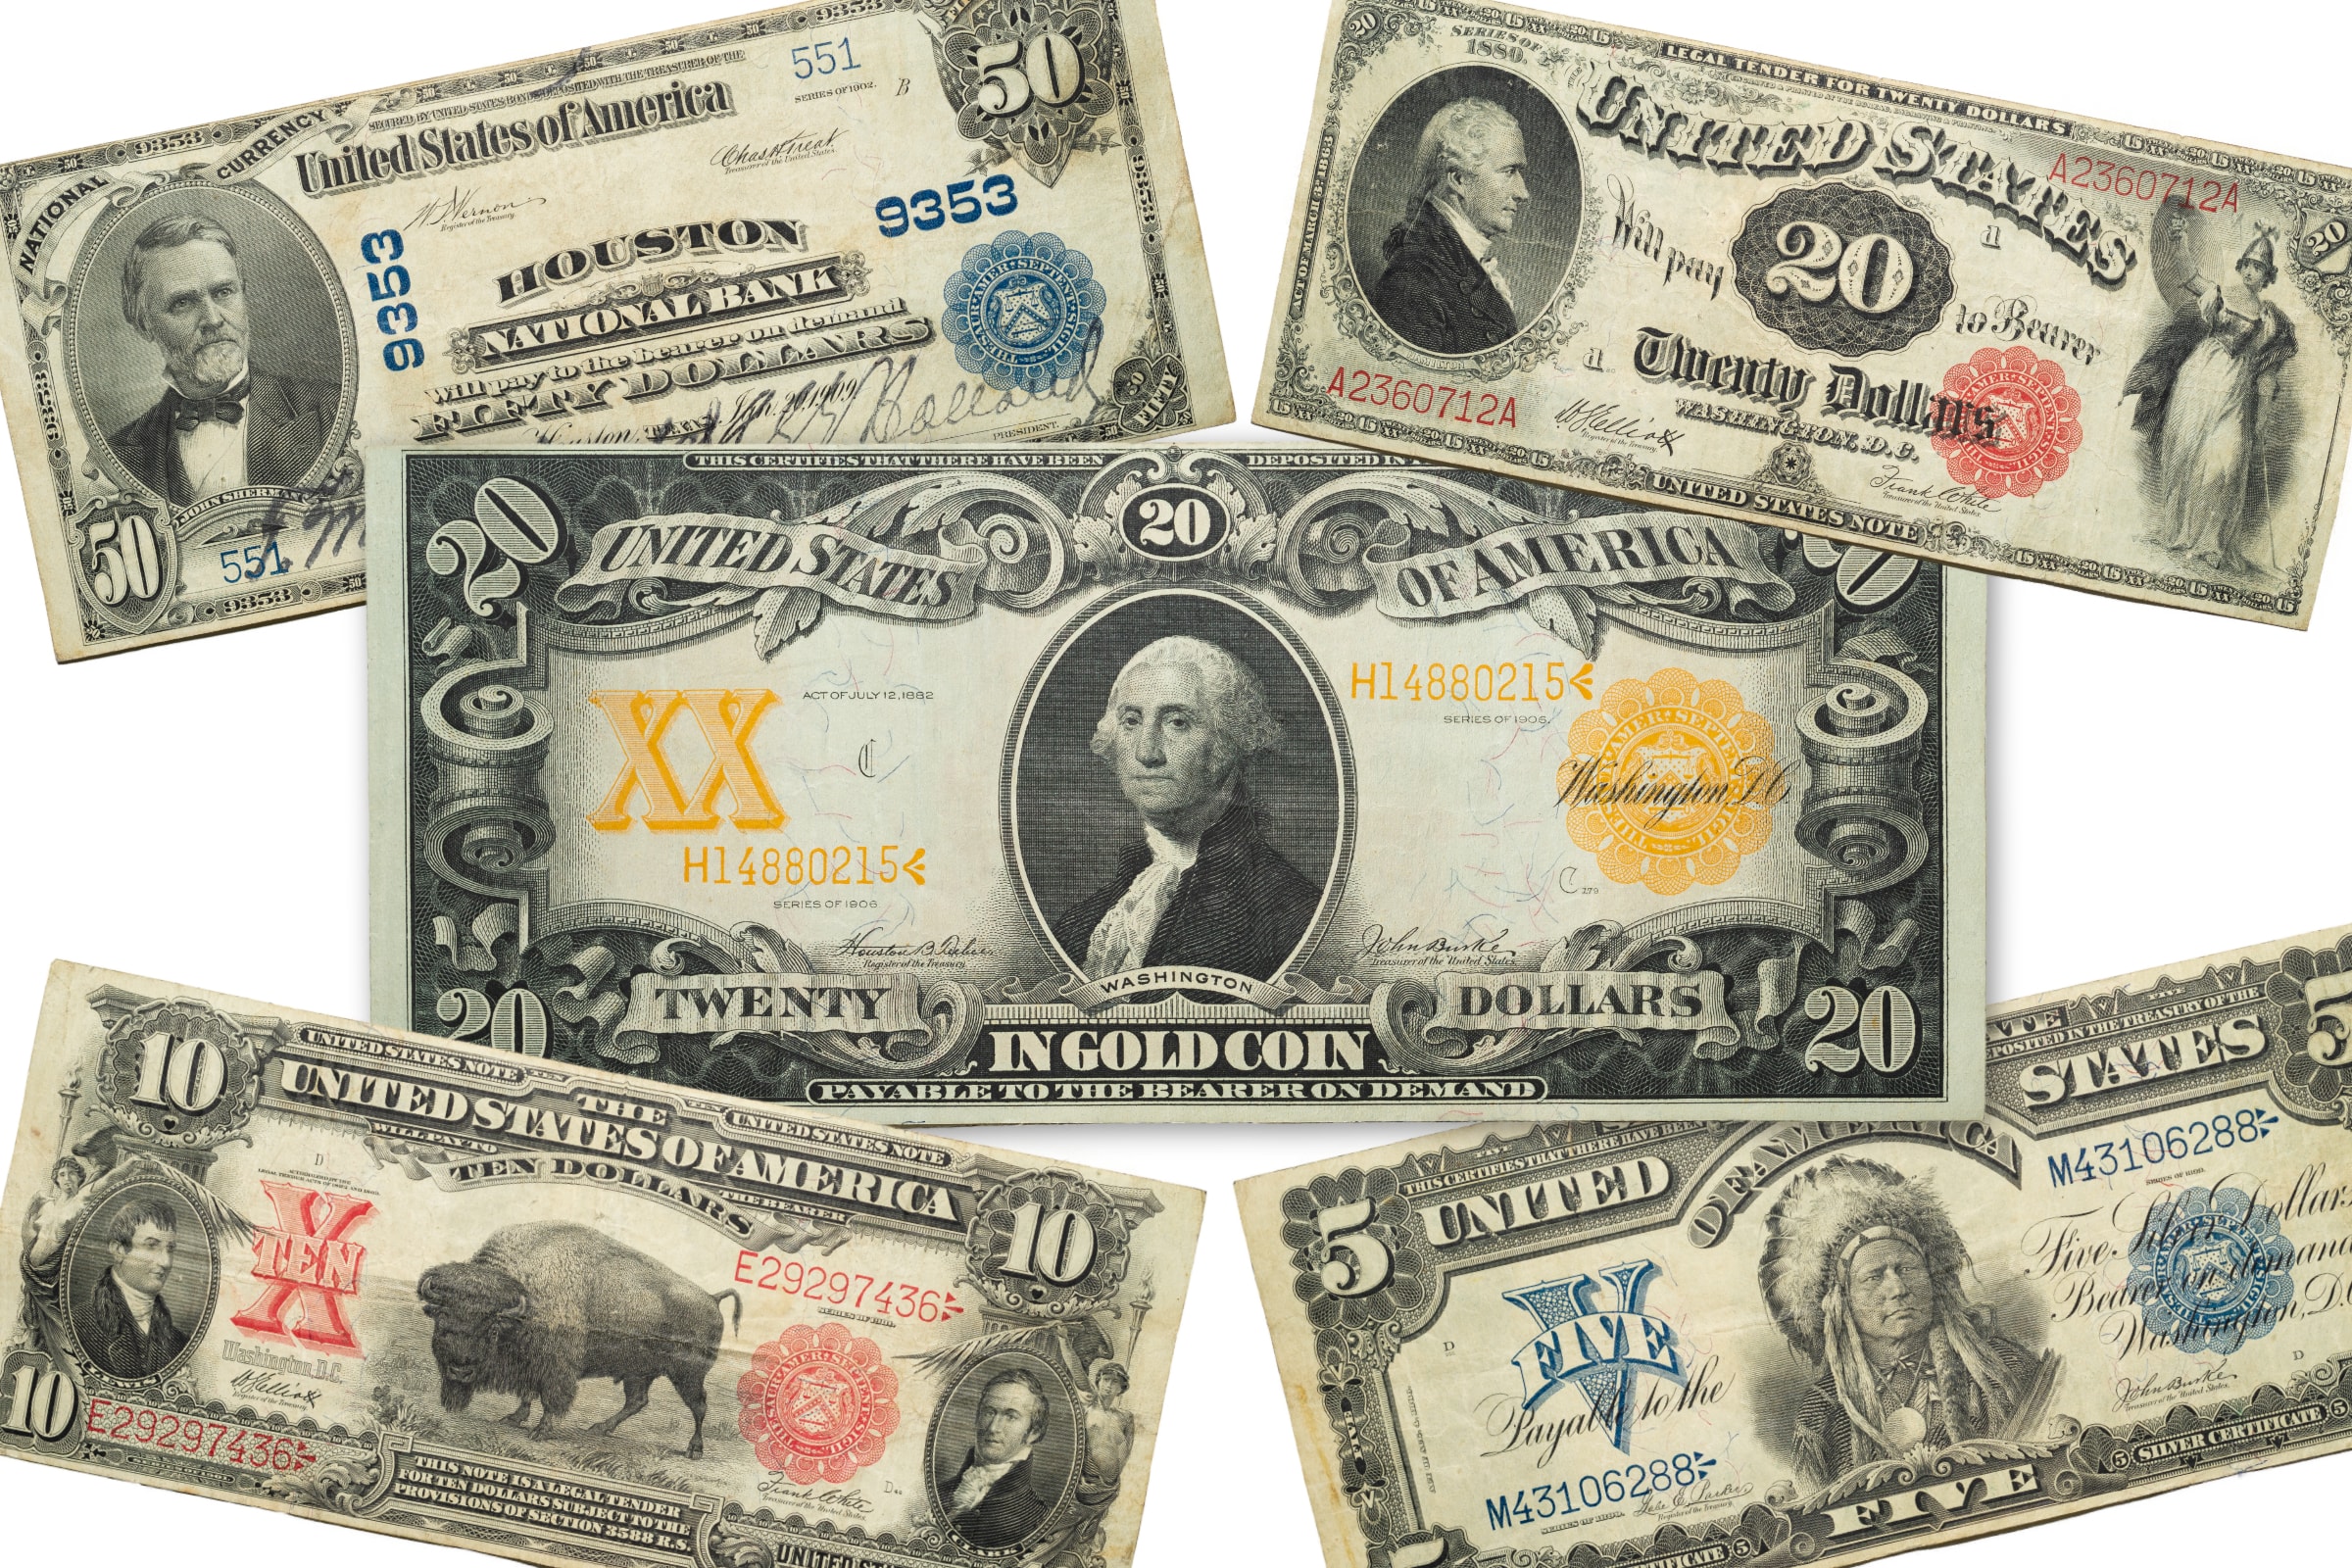 United States Paper Currency Live Simulcast Auction Harritt Group, Inc